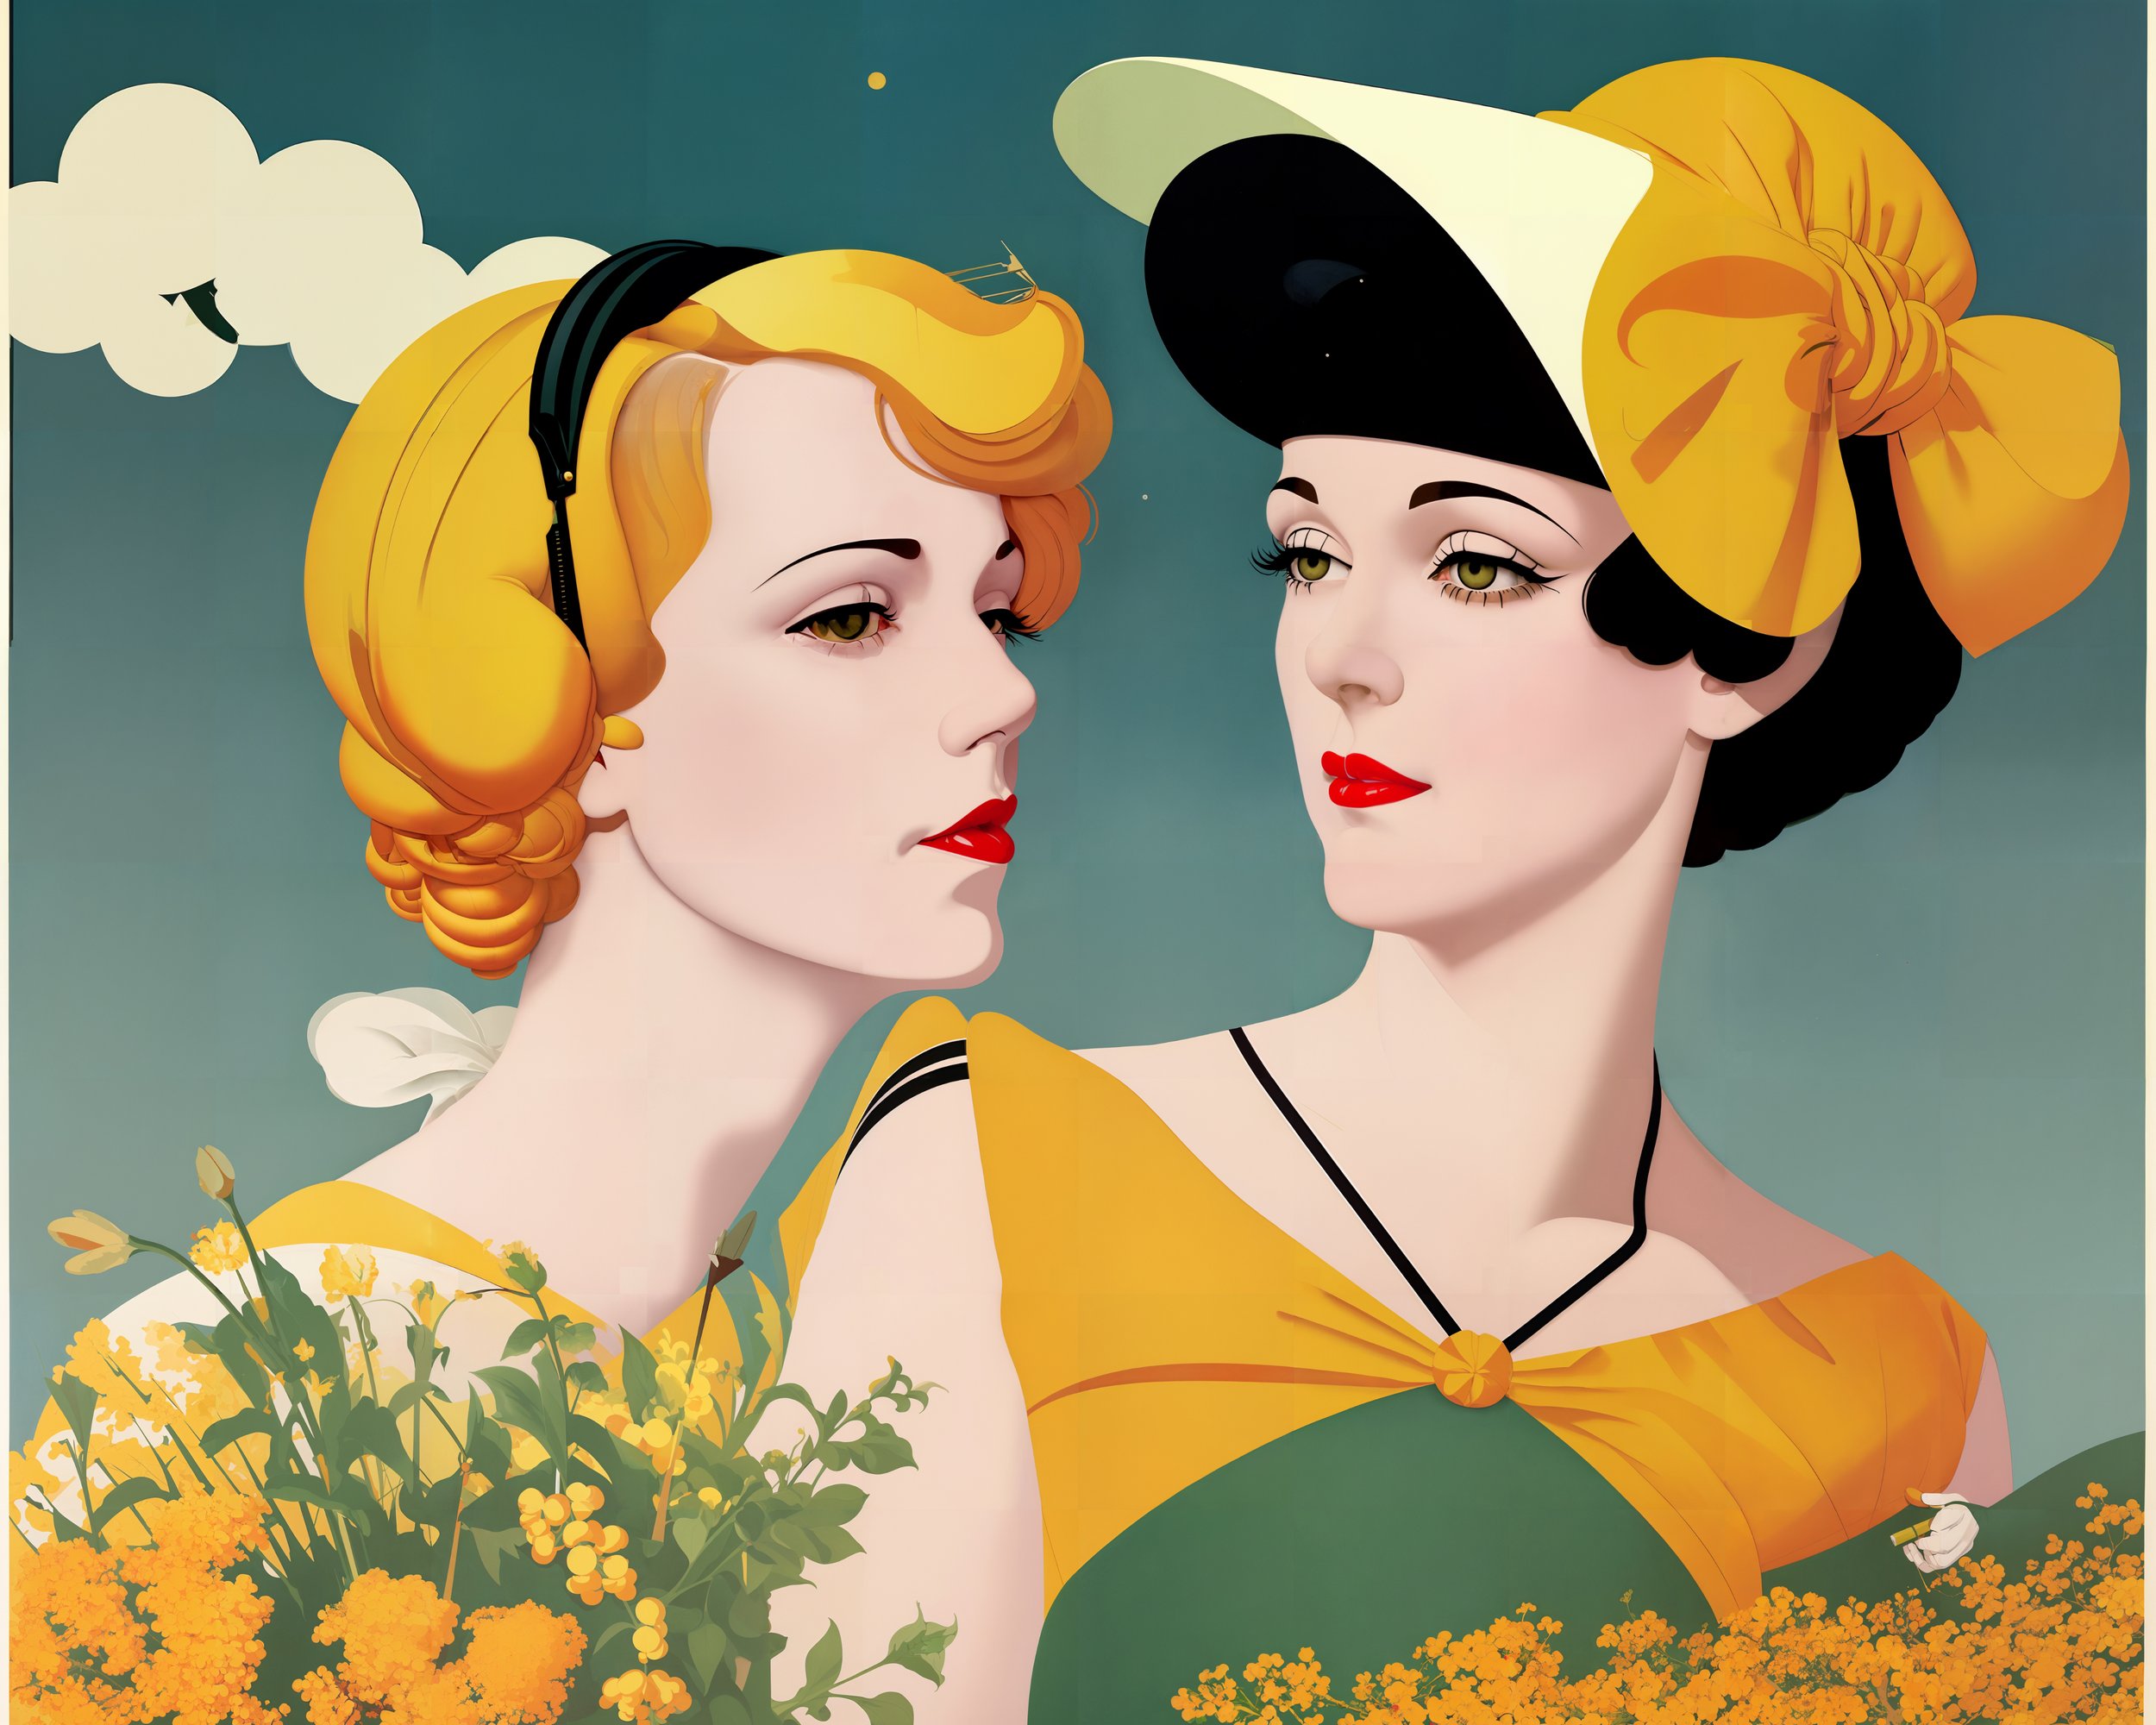 02080-3146156269-masterwork painting, detailed painterly art style by Coles Phillips, retro vibe, extremely hyperdetailed.jpg